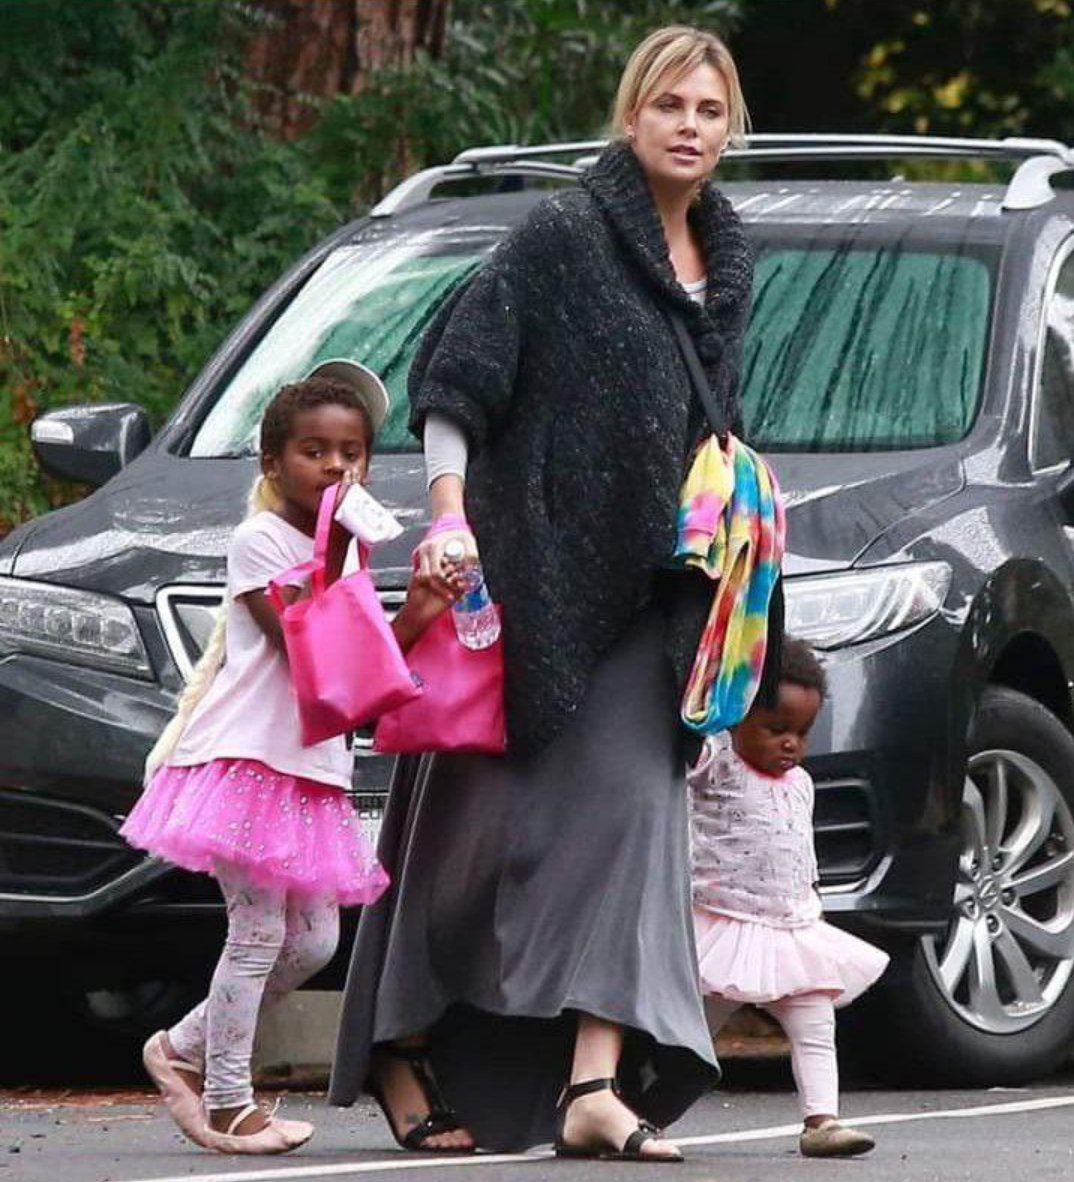 Charlize Theron adopted two young boys and is forcing them to dress and act like girls. 
This isn't gender affirmation 
This isn't acting class
This is child abuse 
When is society going to stand against this sick mental illness?
#LeaveTheKidsAlone https://t.co/x22U6JKK8P